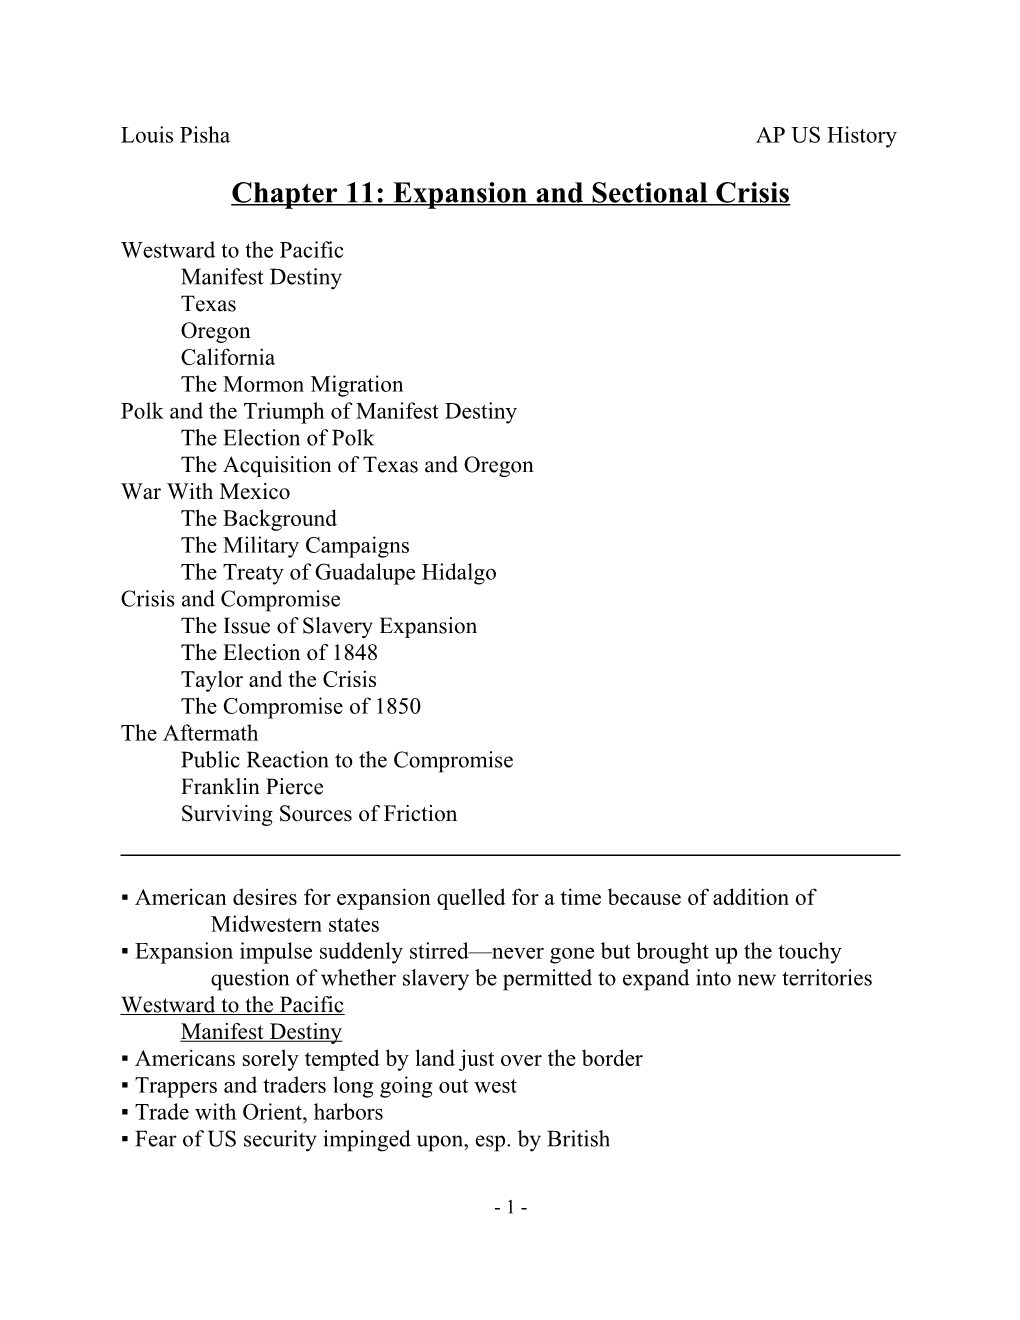 Chapter 11: Expansion and Sectional Crisis